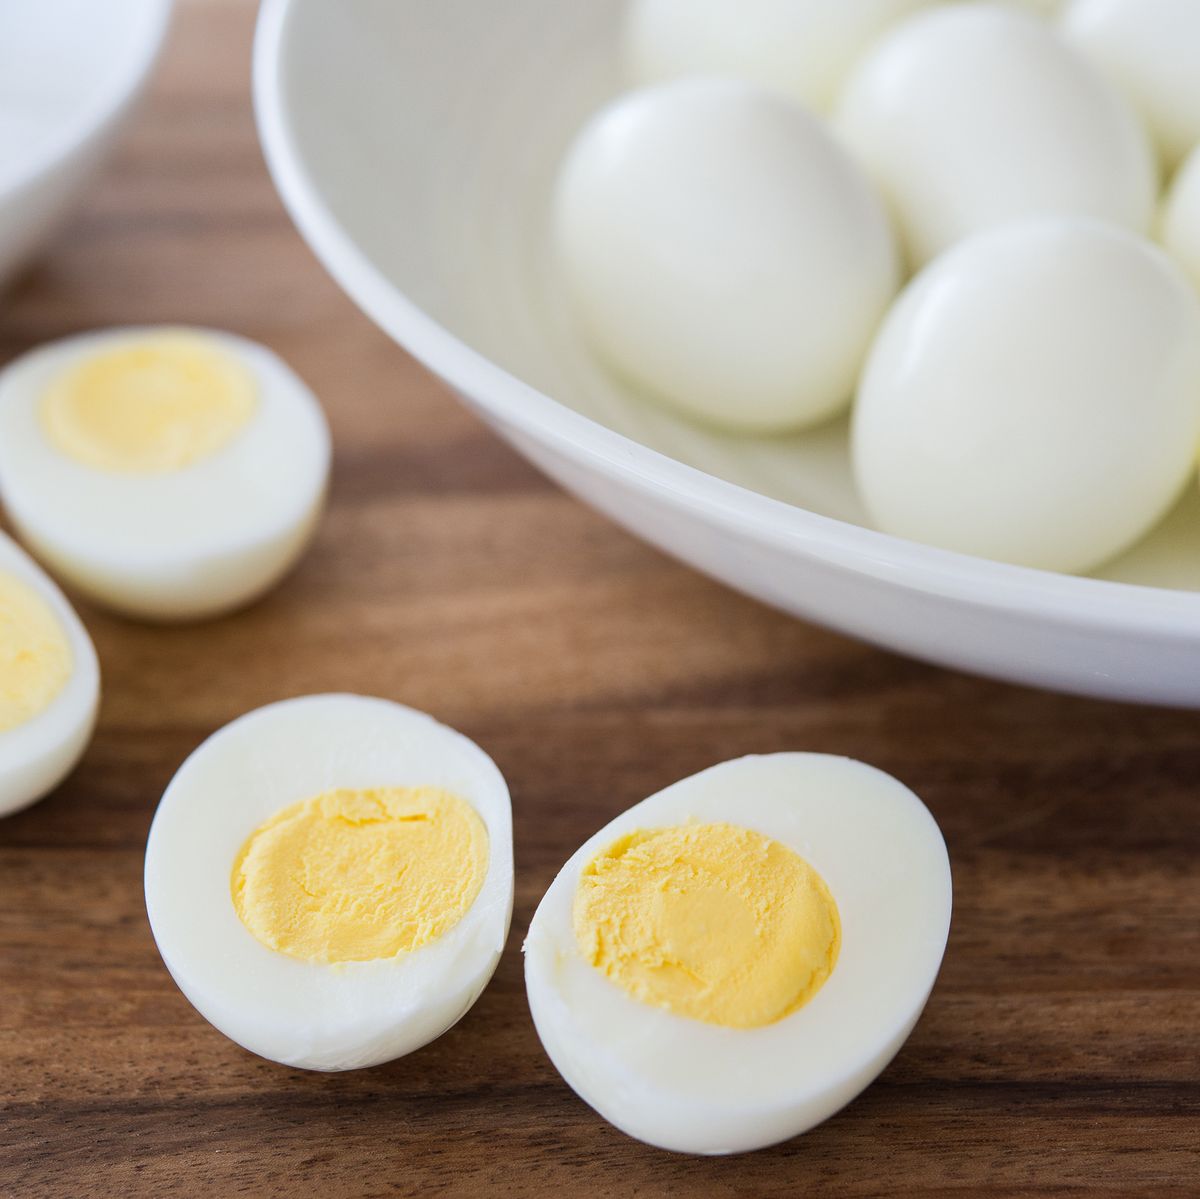 https://hips.hearstapps.com/thepioneerwoman/wp-content/uploads/2015/10/perfect-easy-to-peel-hard-boiled-eggs-001.jpg?crop=0.668xw:1.00xh;0.167xw,0&resize=1200:*